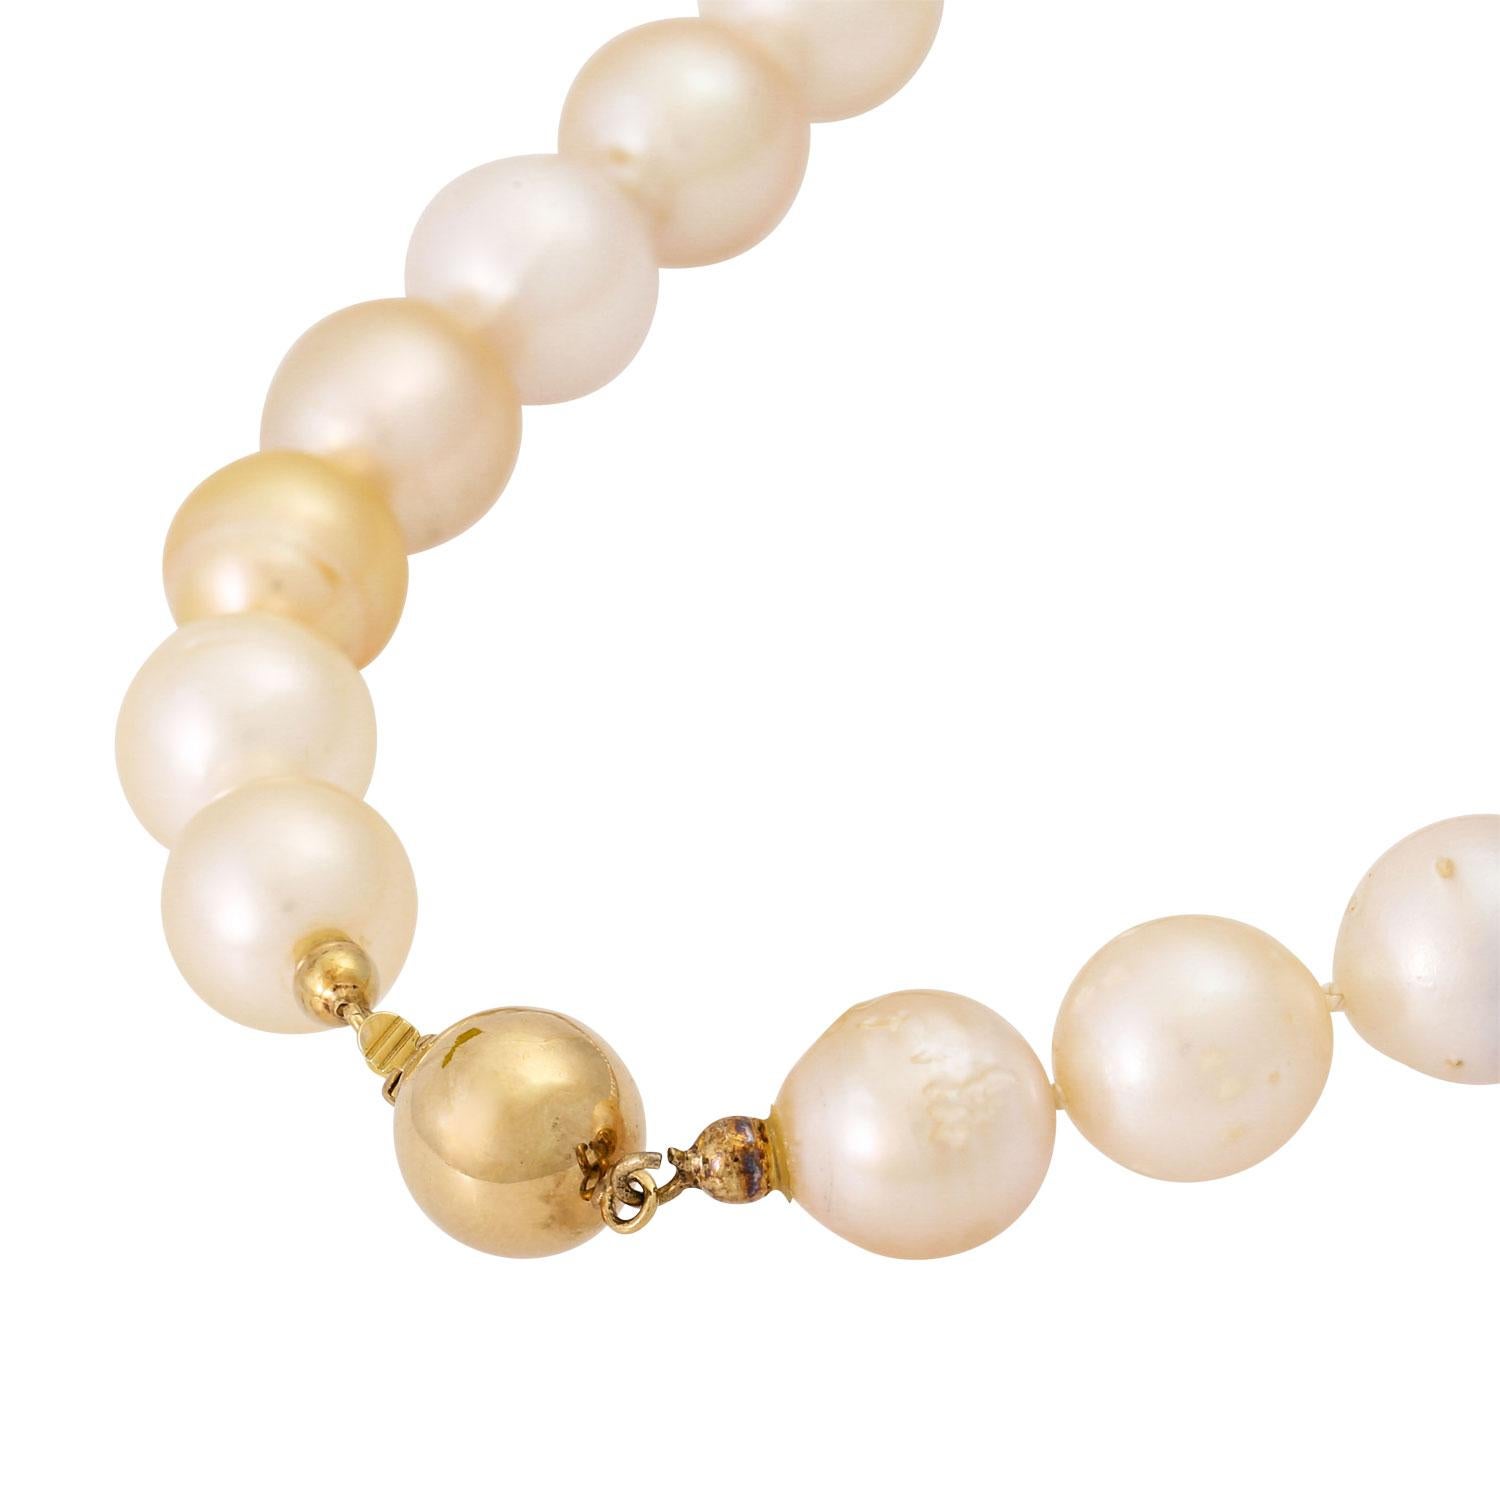 Uncut South Sea Pearl Necklace, 35 Cultured Pearls For Sale